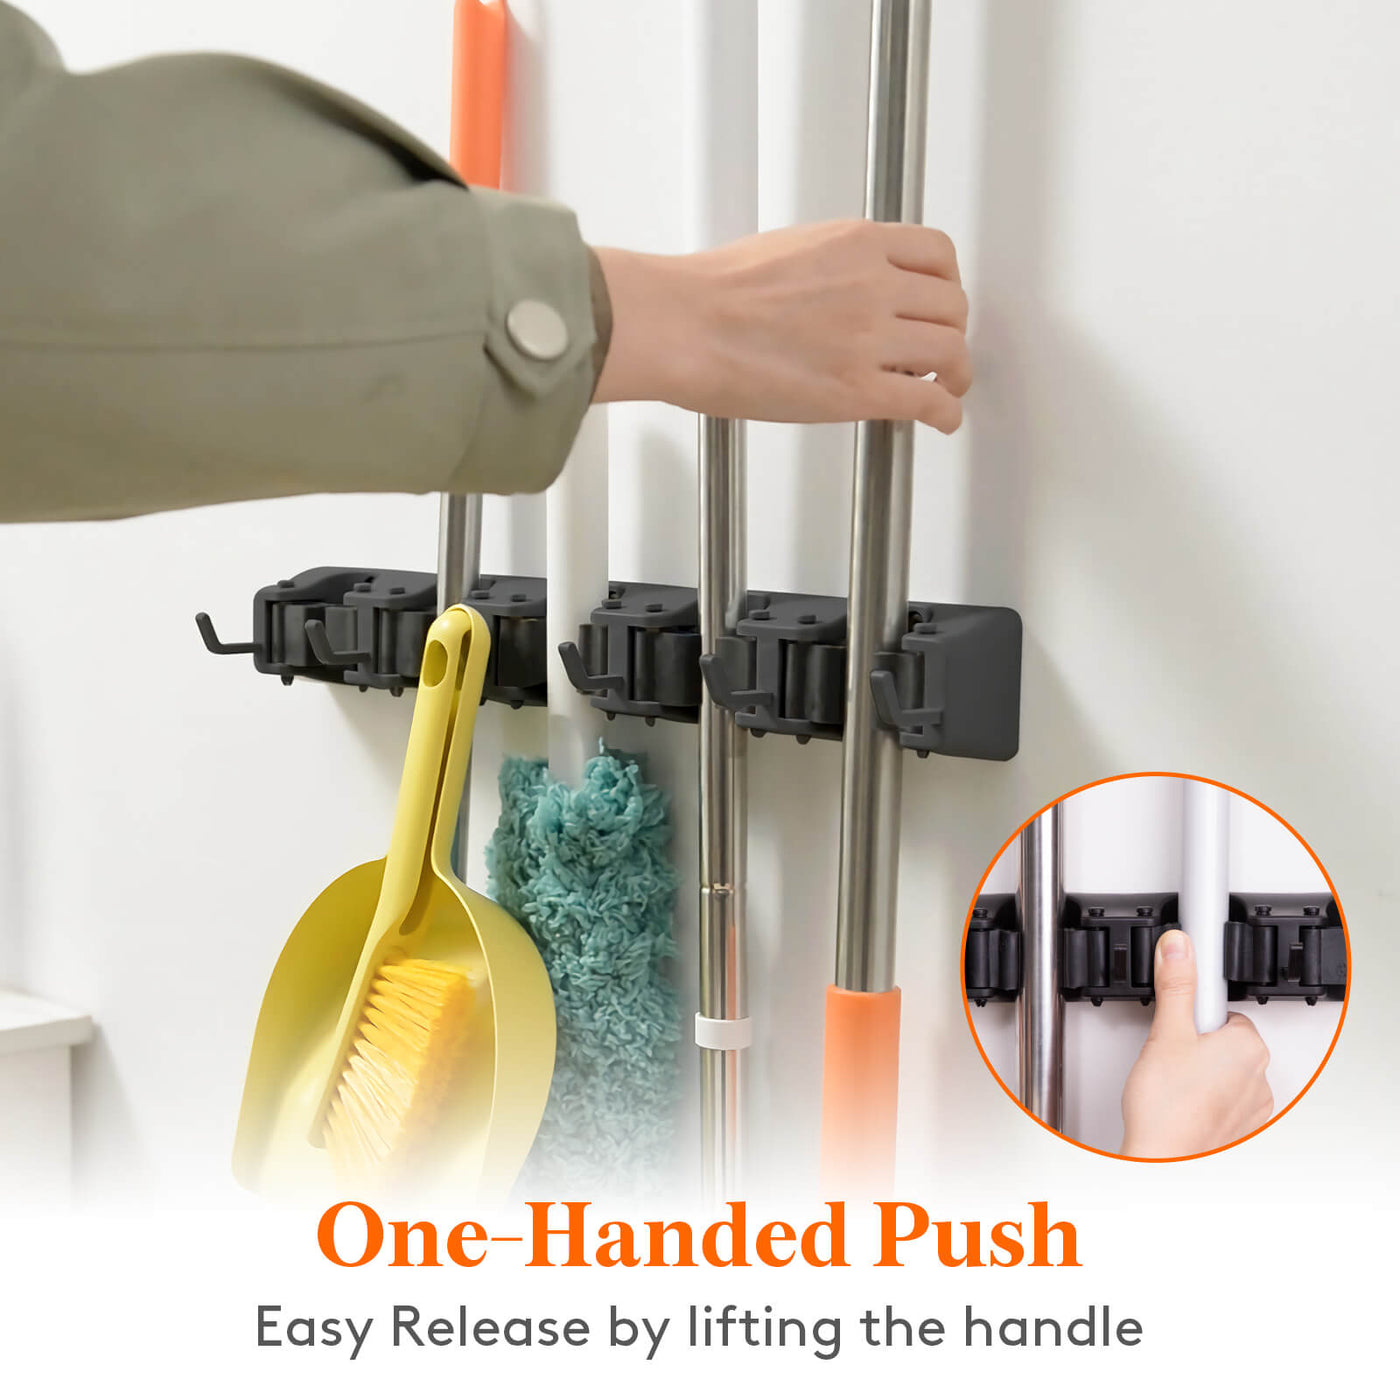 Mop and Broom Holder Wall Mount - Lifewit – Lifewitstore